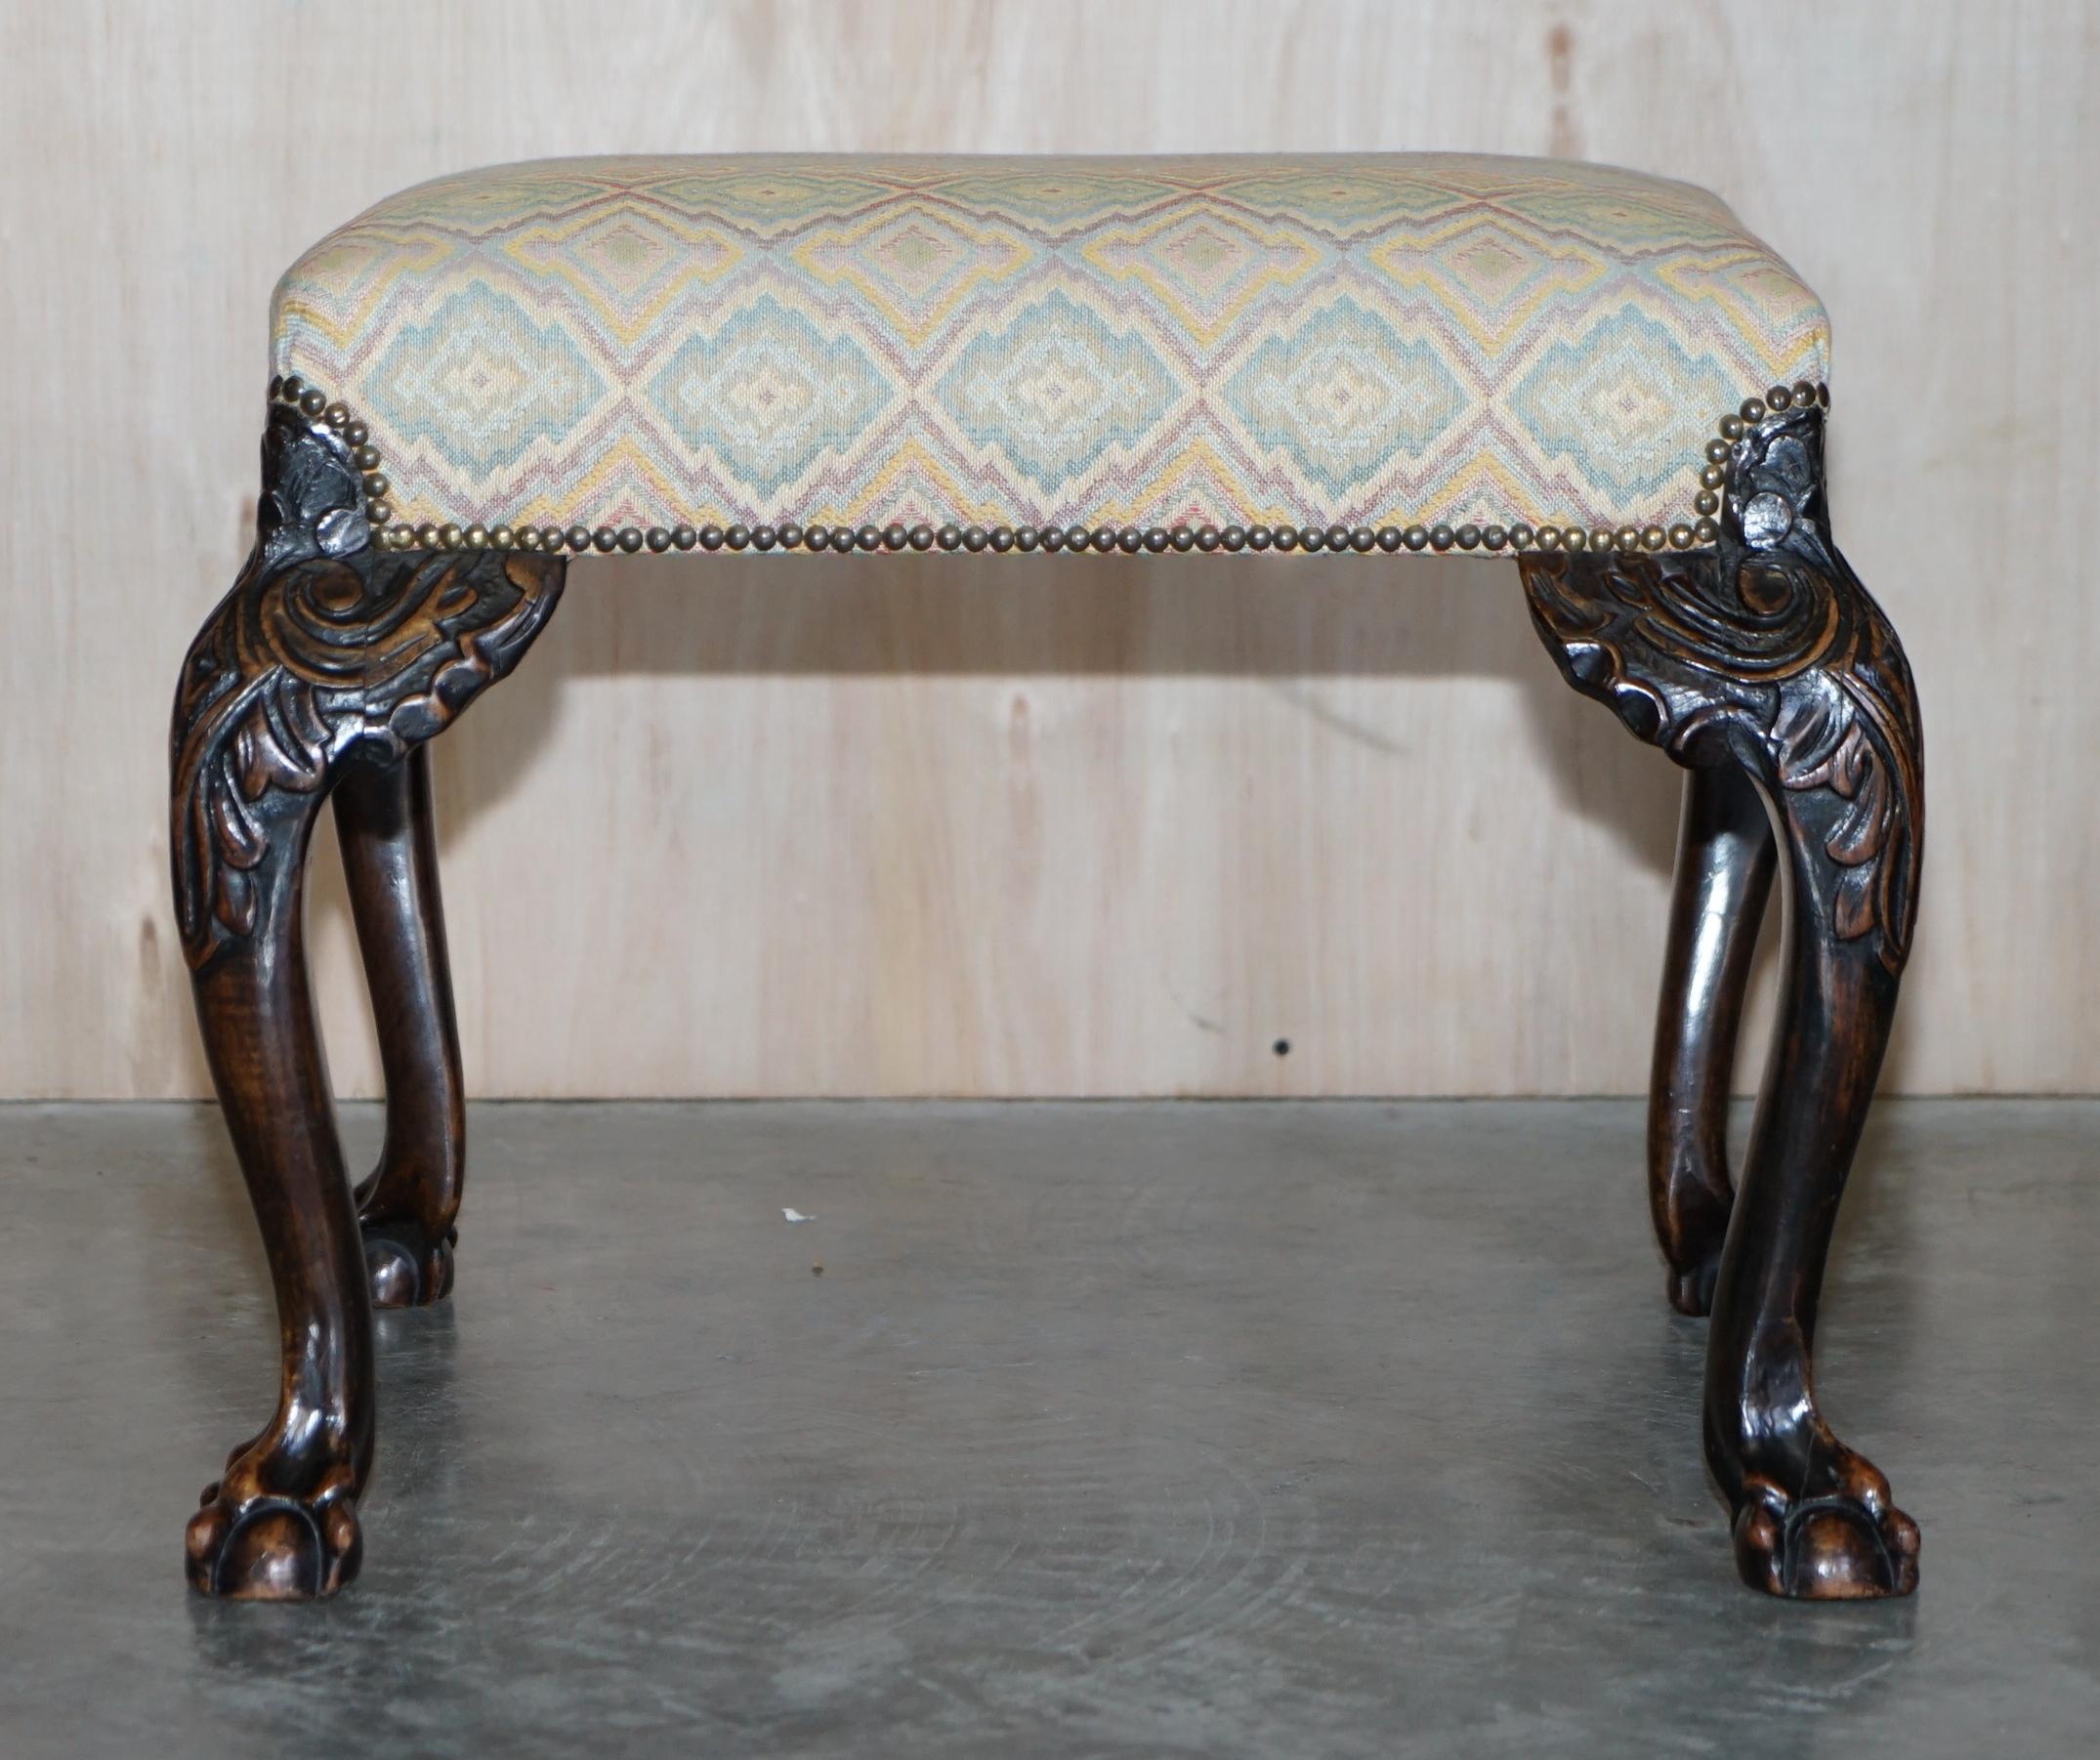 We are delighted to offer for sale this sublime circa 1780 George II and later walnut stool with ornately carved legs and Claw & Ball feet

This piece is a very good looking well made and decorative stool with a glorious timber patina. It is just